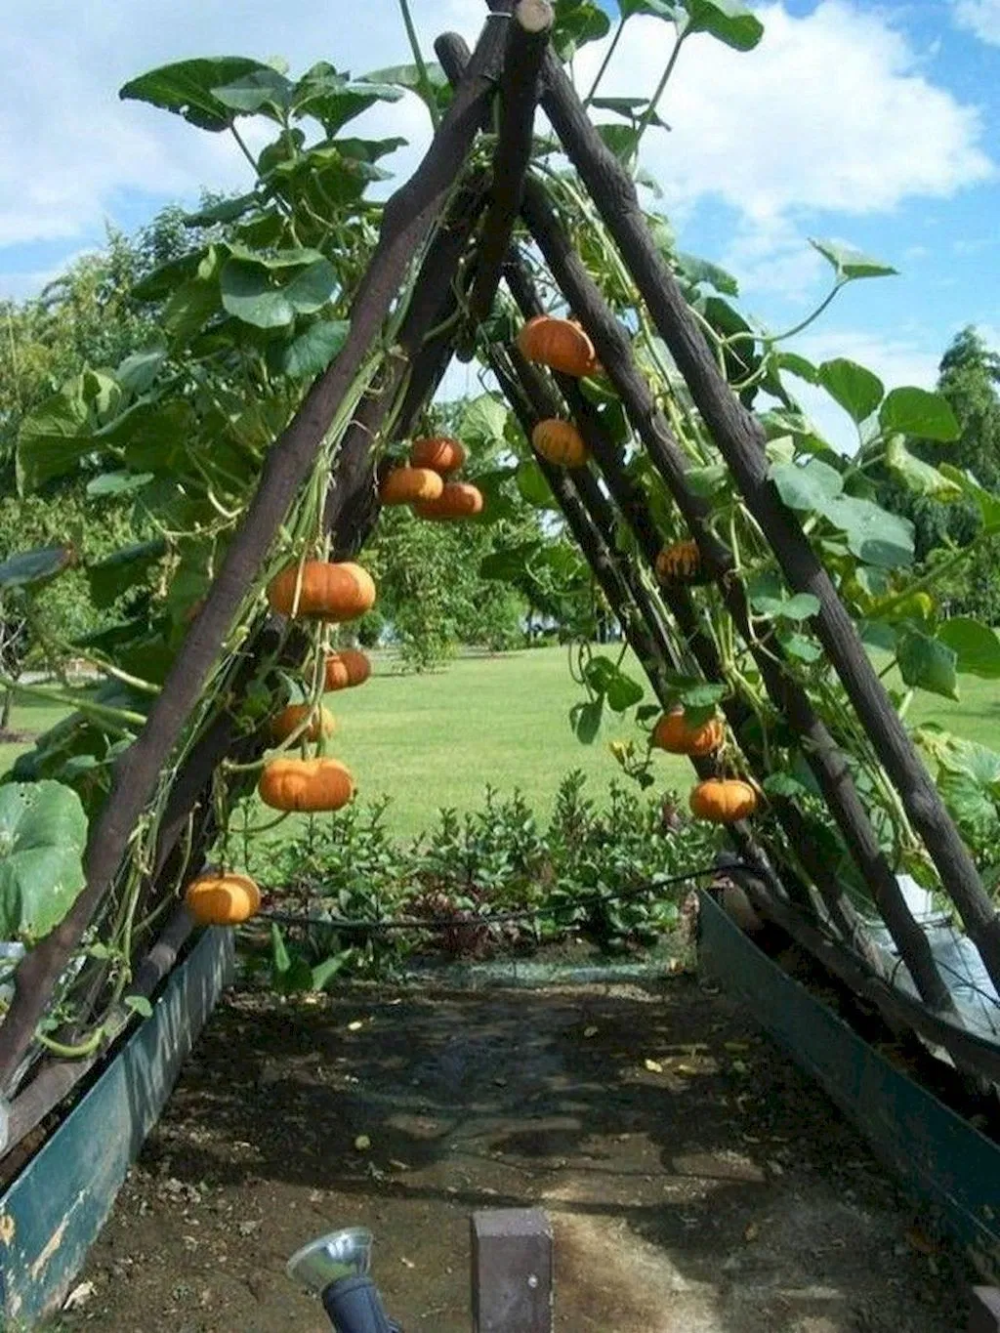 Creative and innovative ways to design your vegetable garden